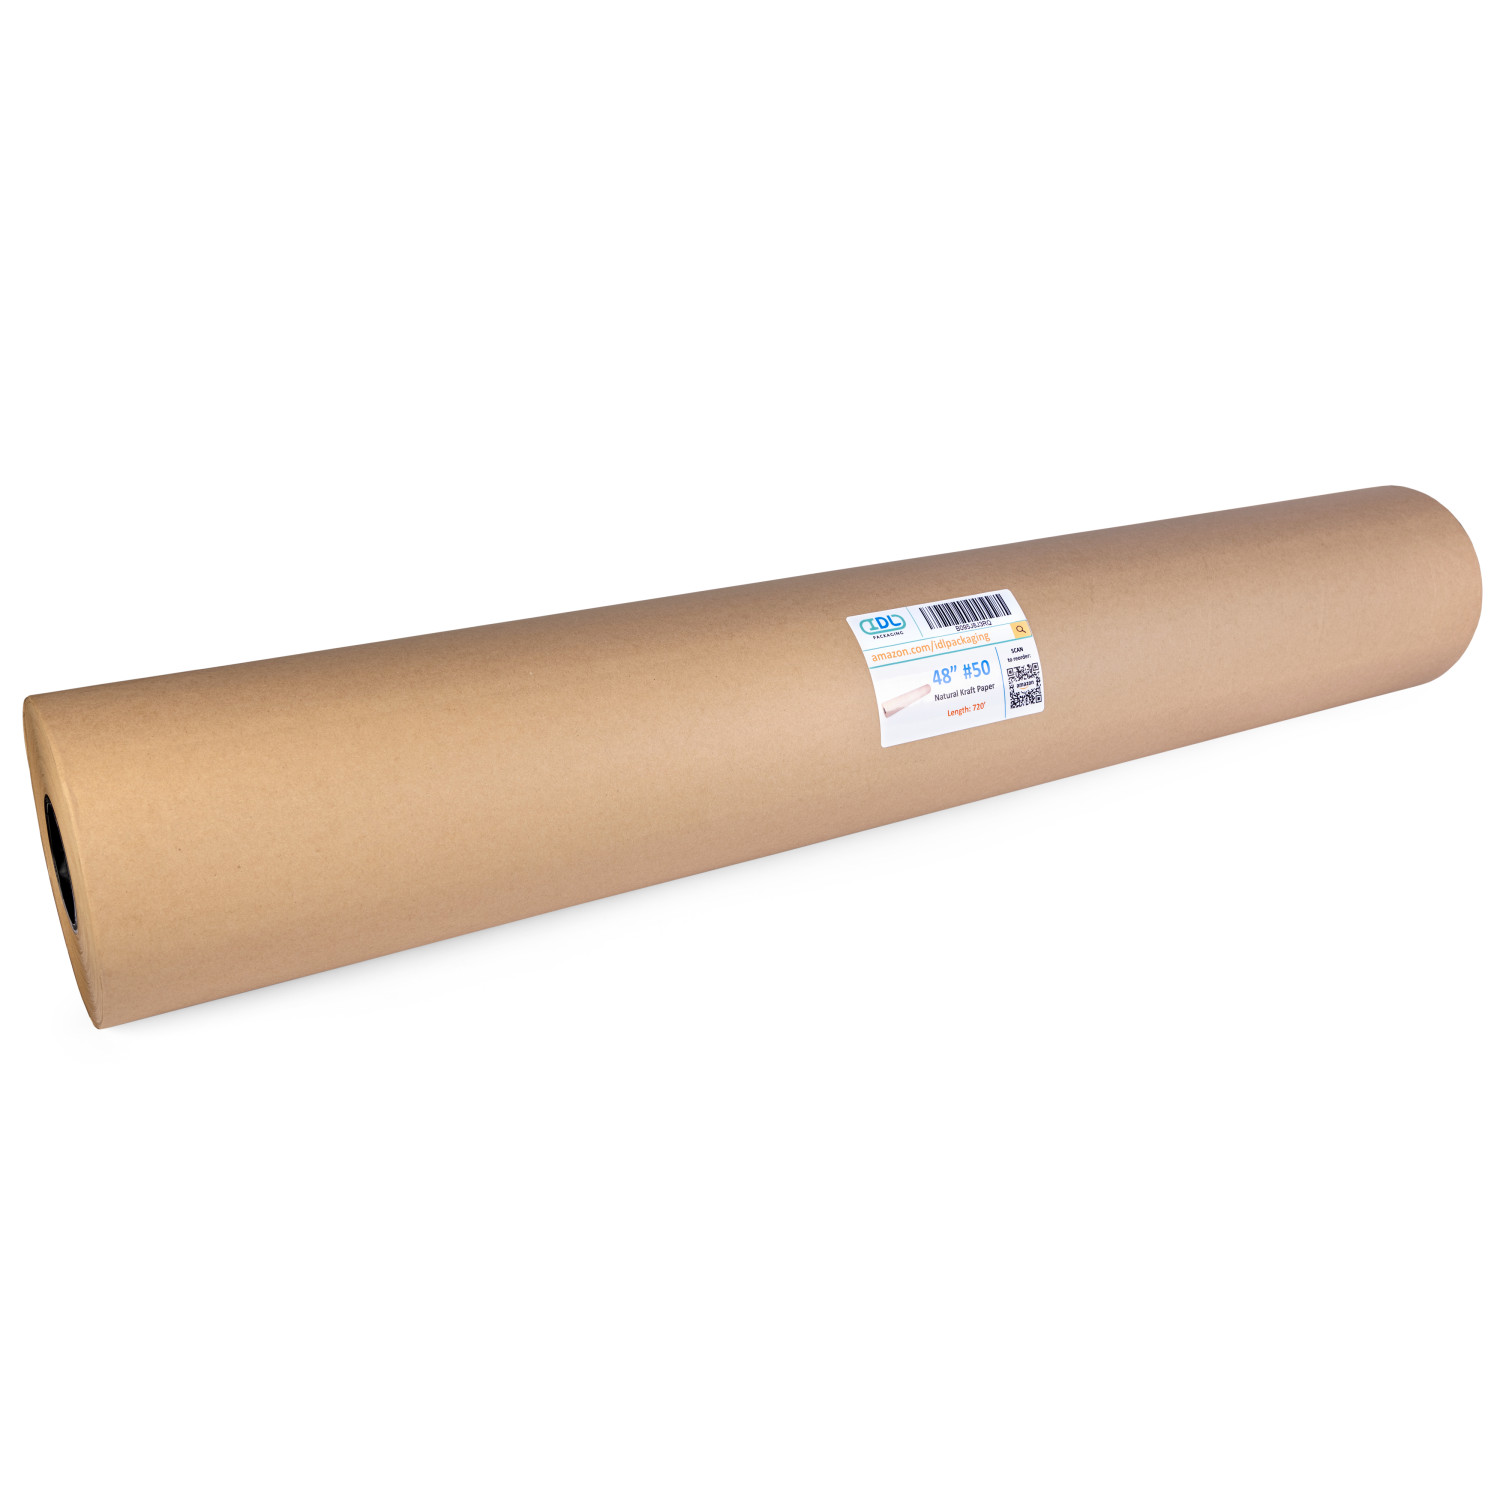 Idl Packaging 18 inch x 250 Feet (3000 Inches) Black Kraft Paper Roll, 30 lbs. (Pack of 1), Size: 18 x 250